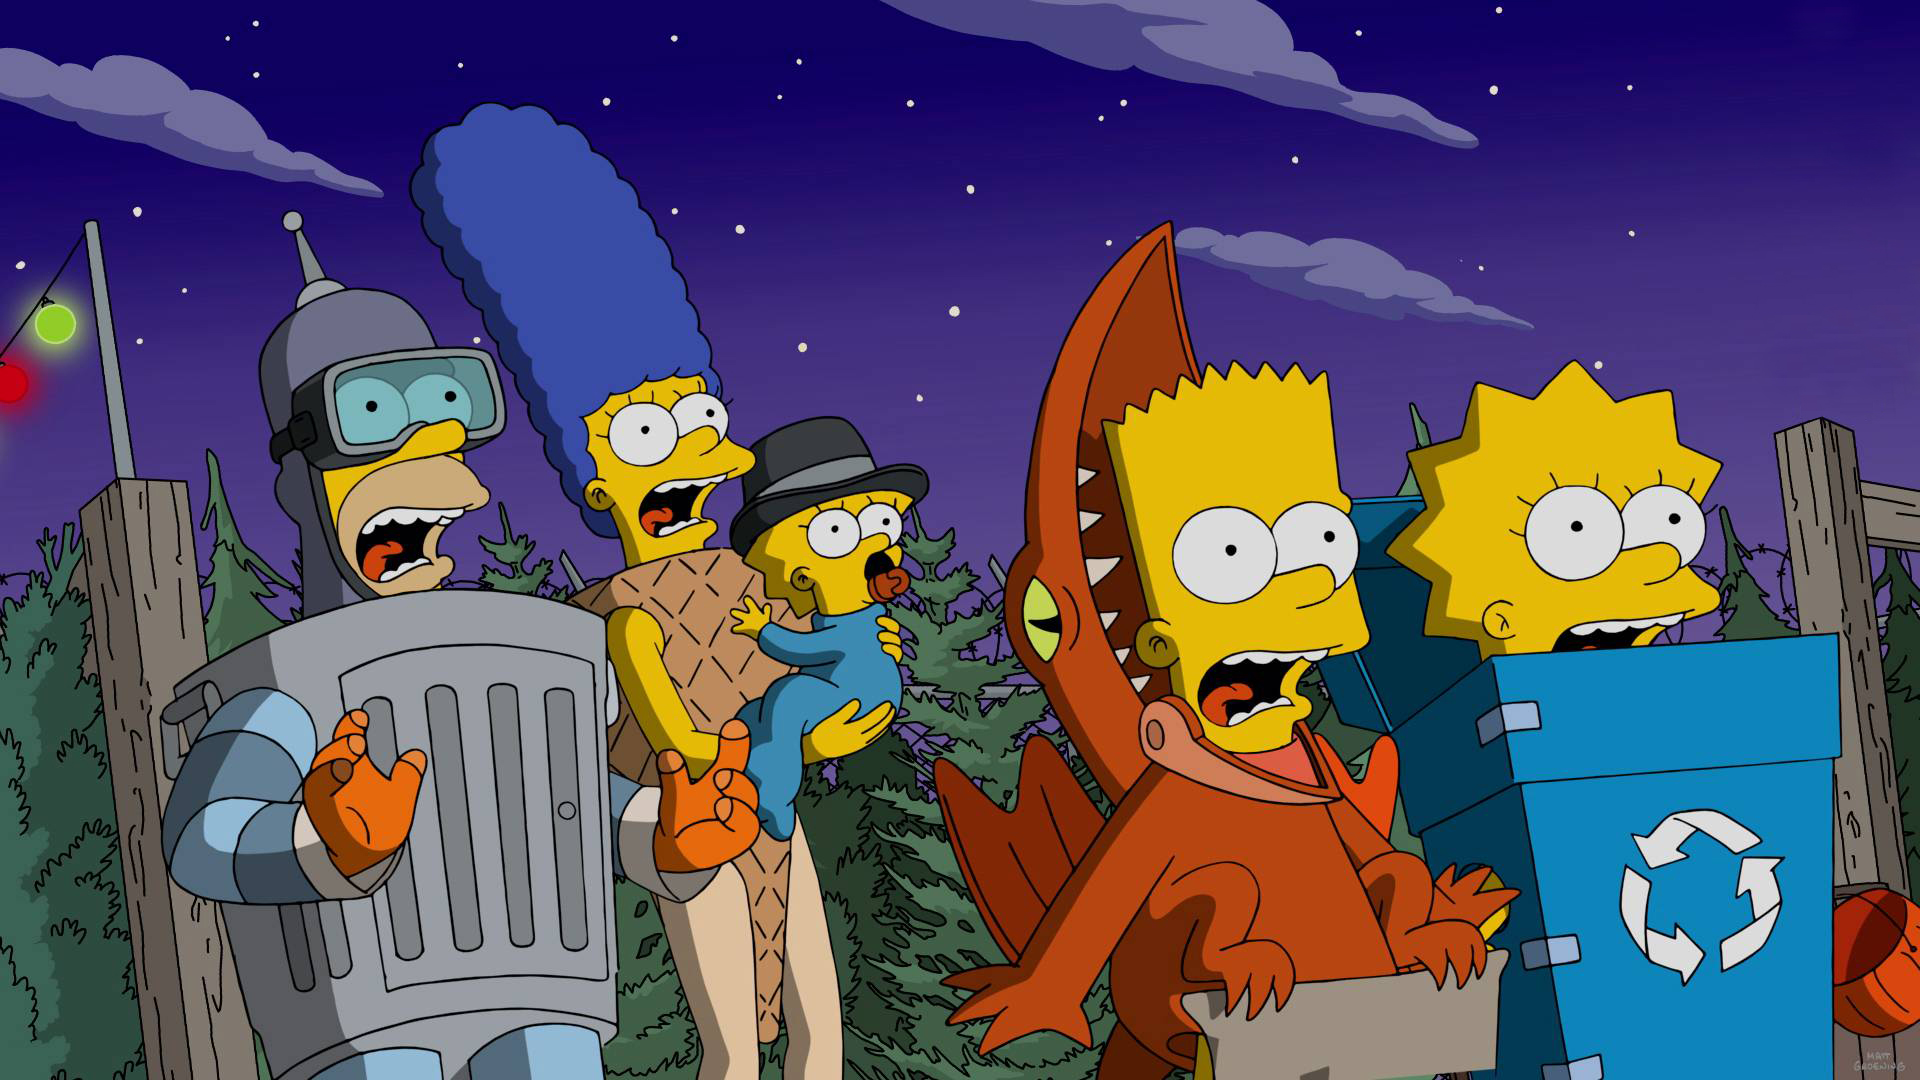 Celebrate Halloween With FXX's 'The Simpsons' 'Treehouse of Horror